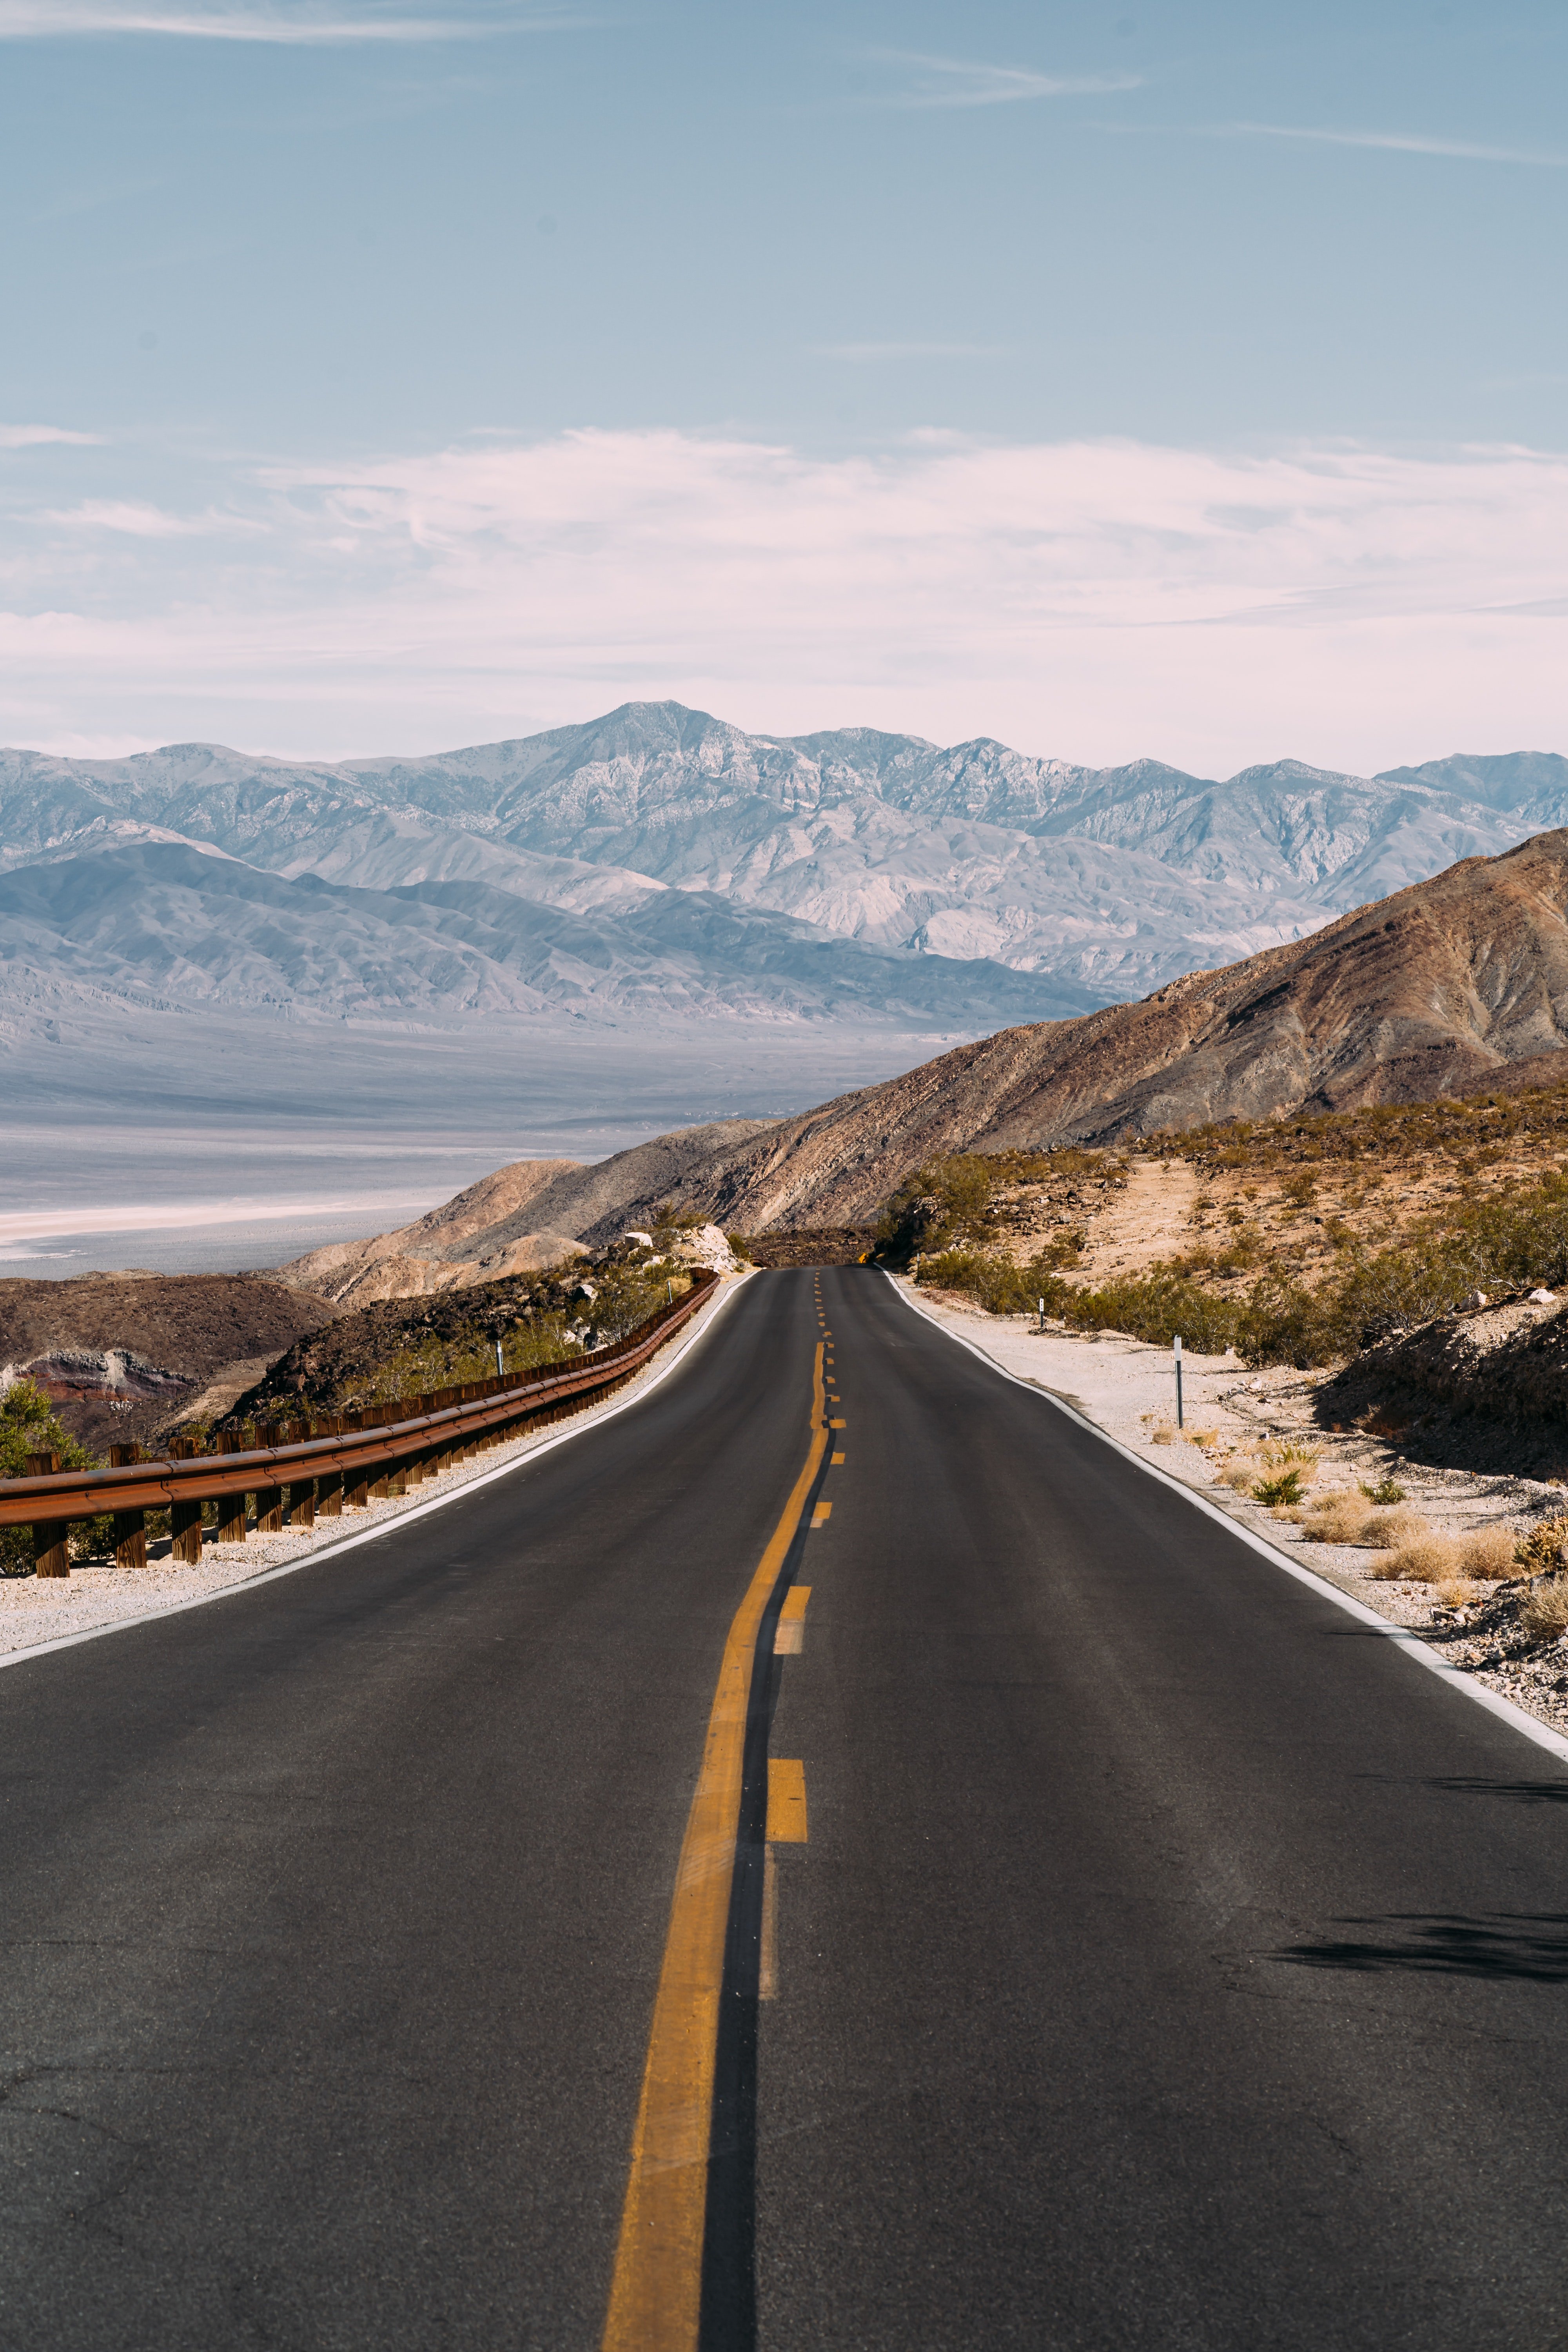 A highway. | Source: Pexels/RicardoEsquivel